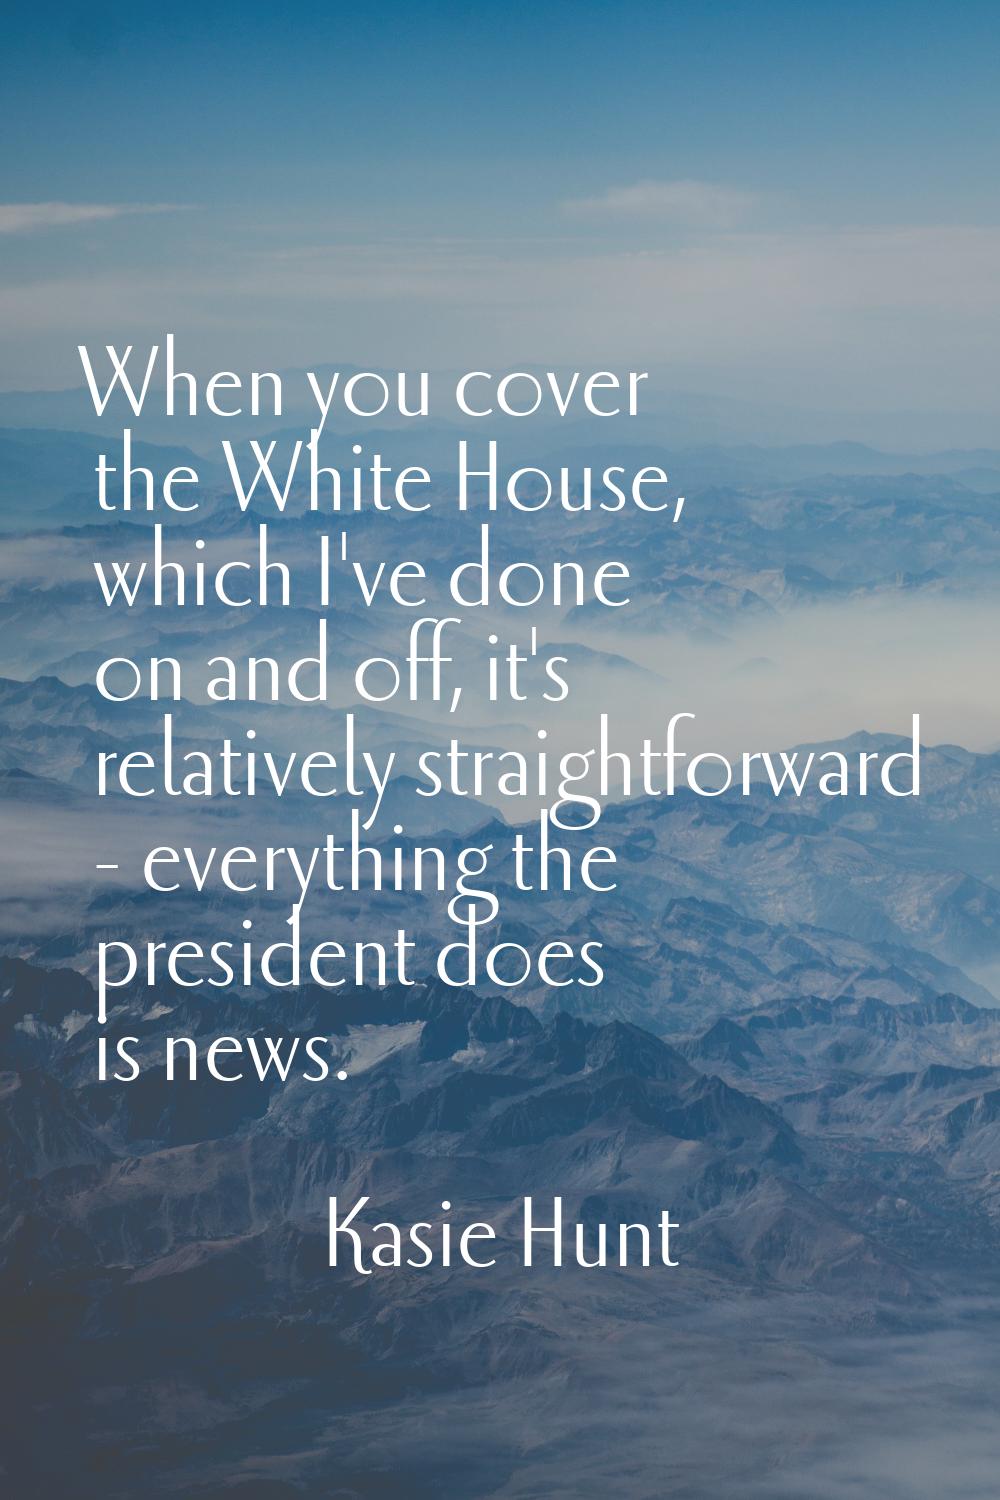 When you cover the White House, which I've done on and off, it's relatively straightforward - every